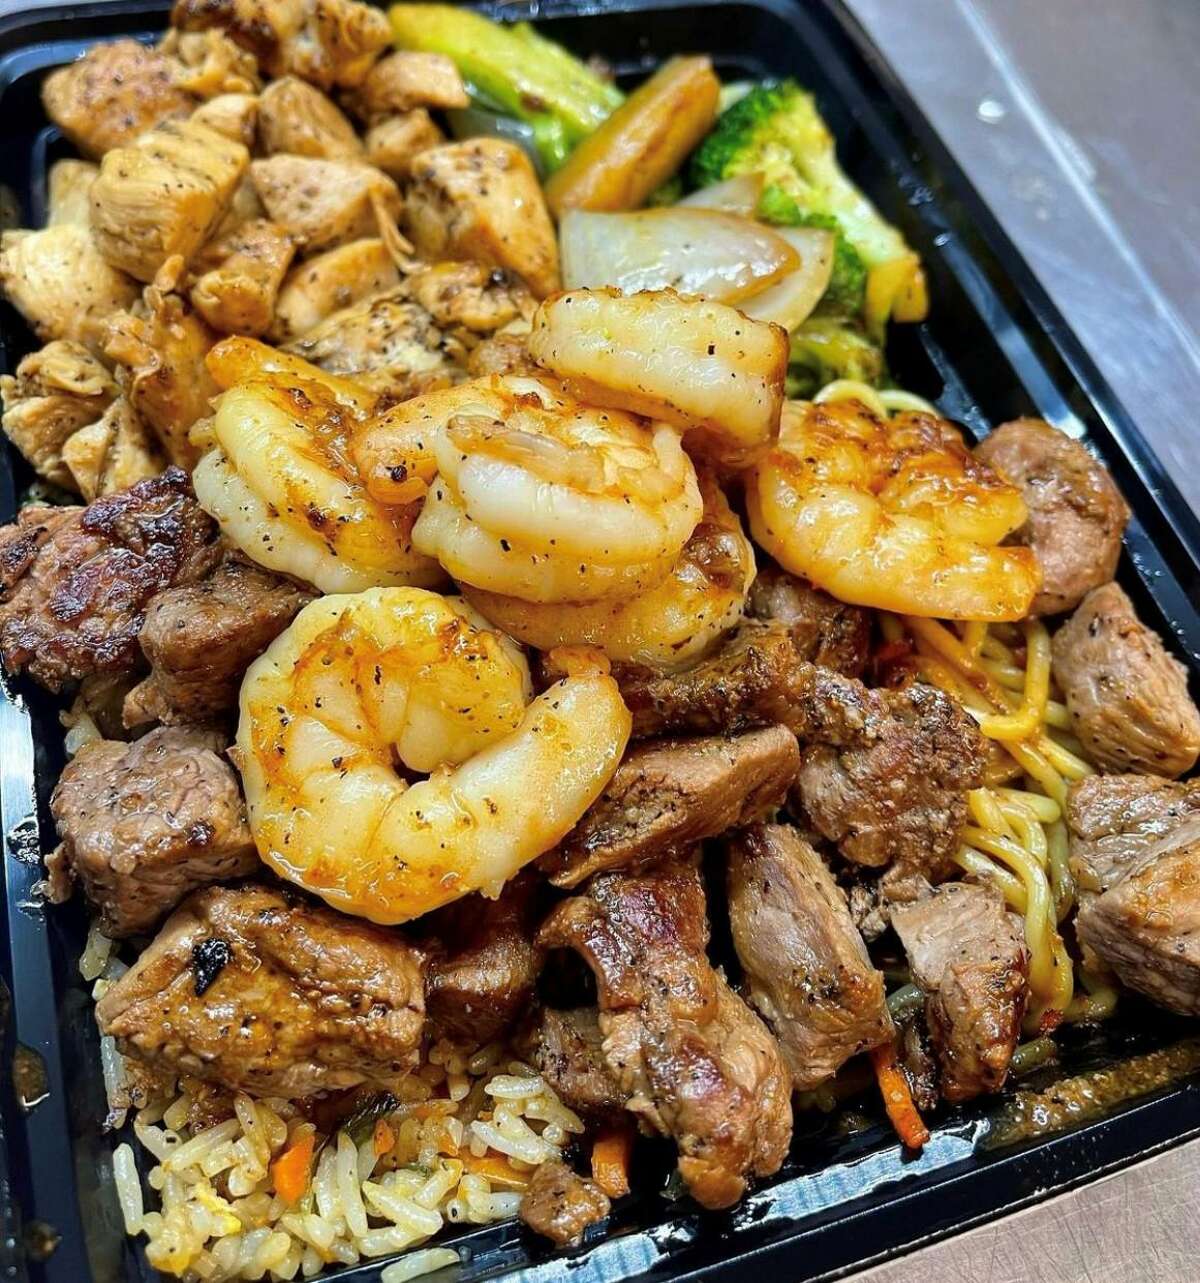 Hibachi Bros. serves up a New York Steak, chicken and shrimp trio for meat lovers.